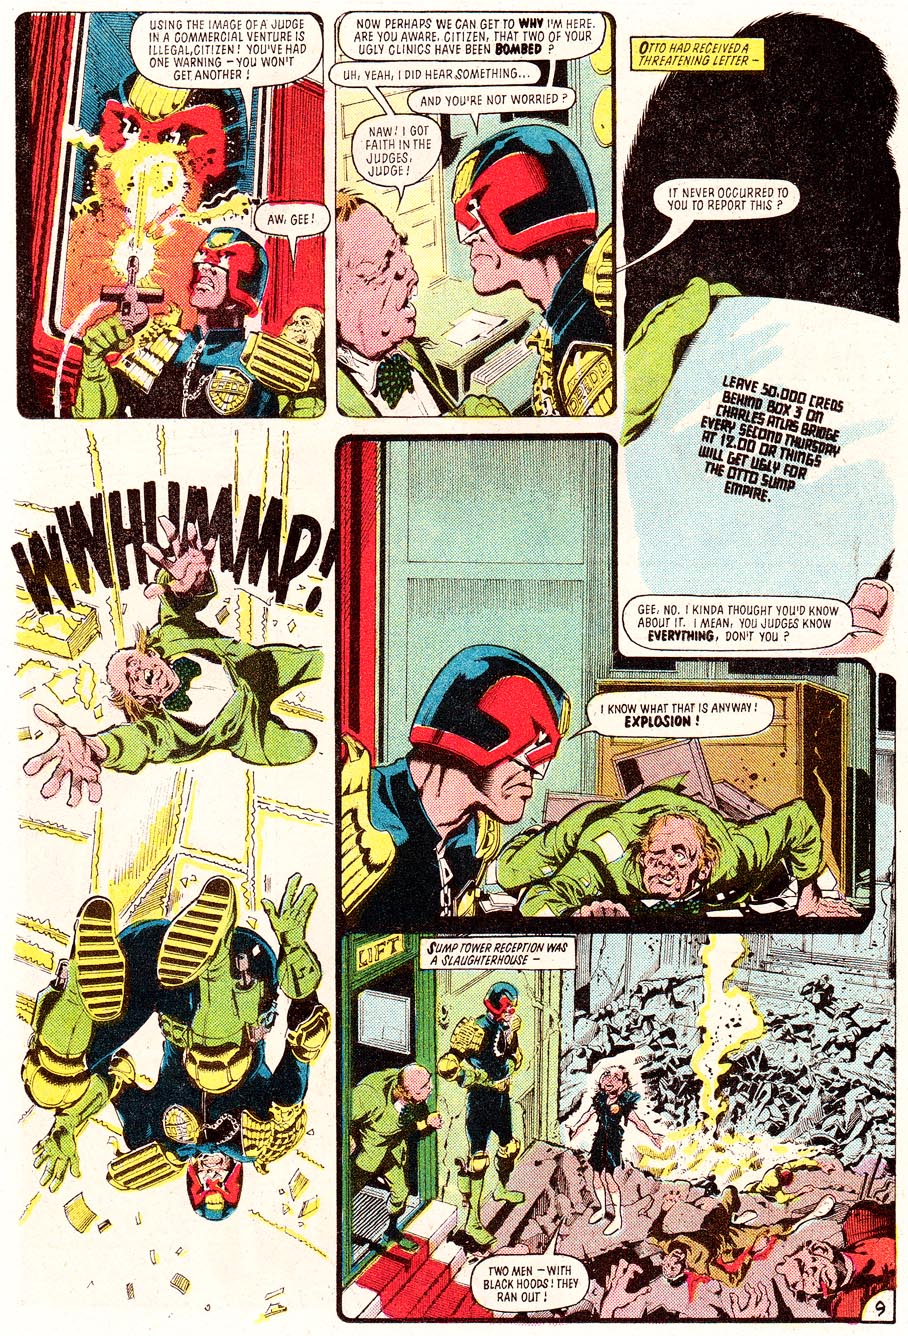 Read online Judge Dredd: The Complete Case Files comic -  Issue # TPB 4 - 193